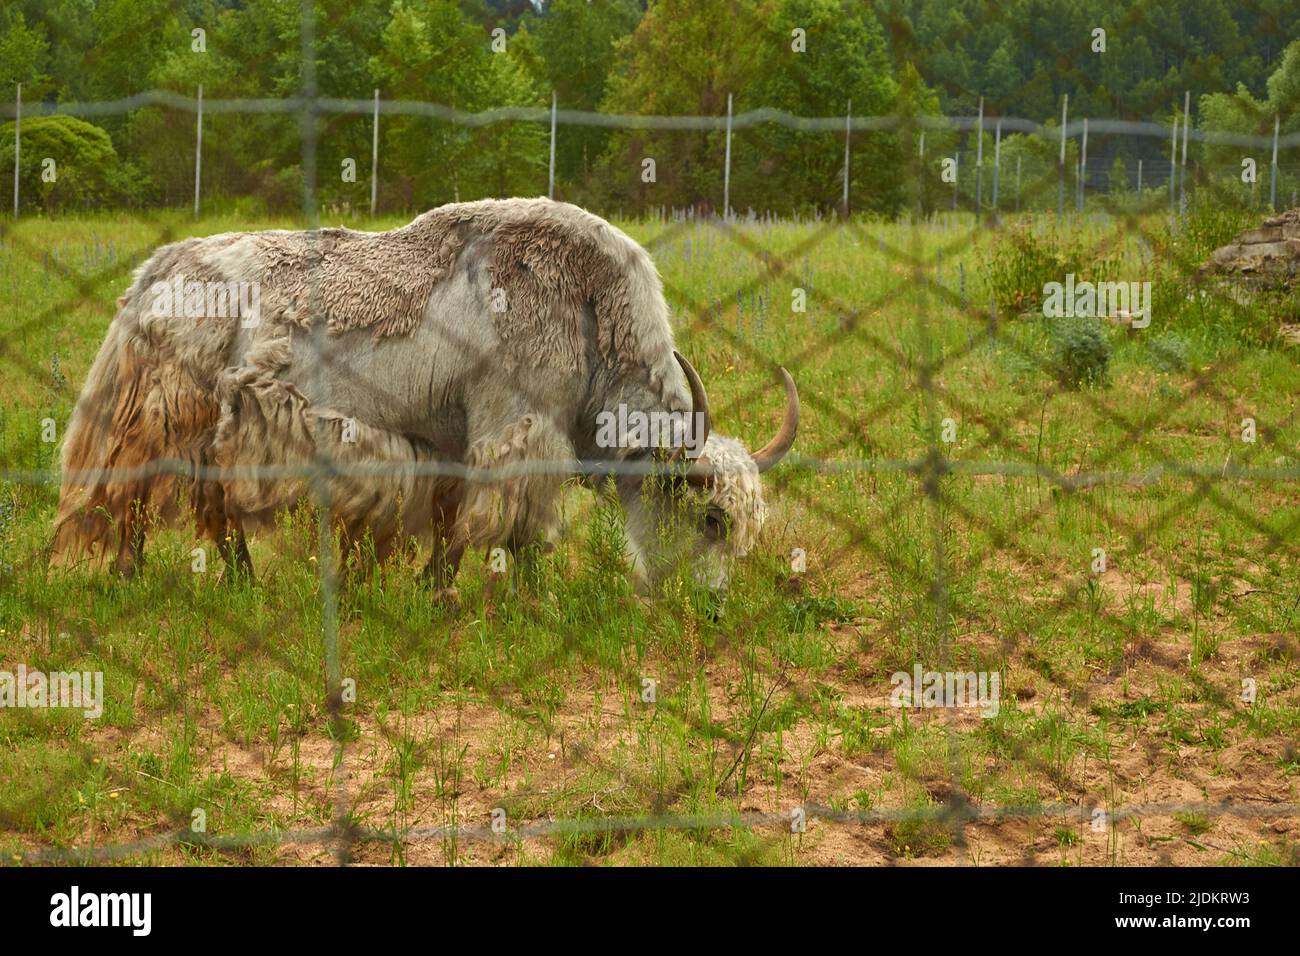 Bos grunniens. A male domestic yak grazes in a meadow in a corral Stock Photo